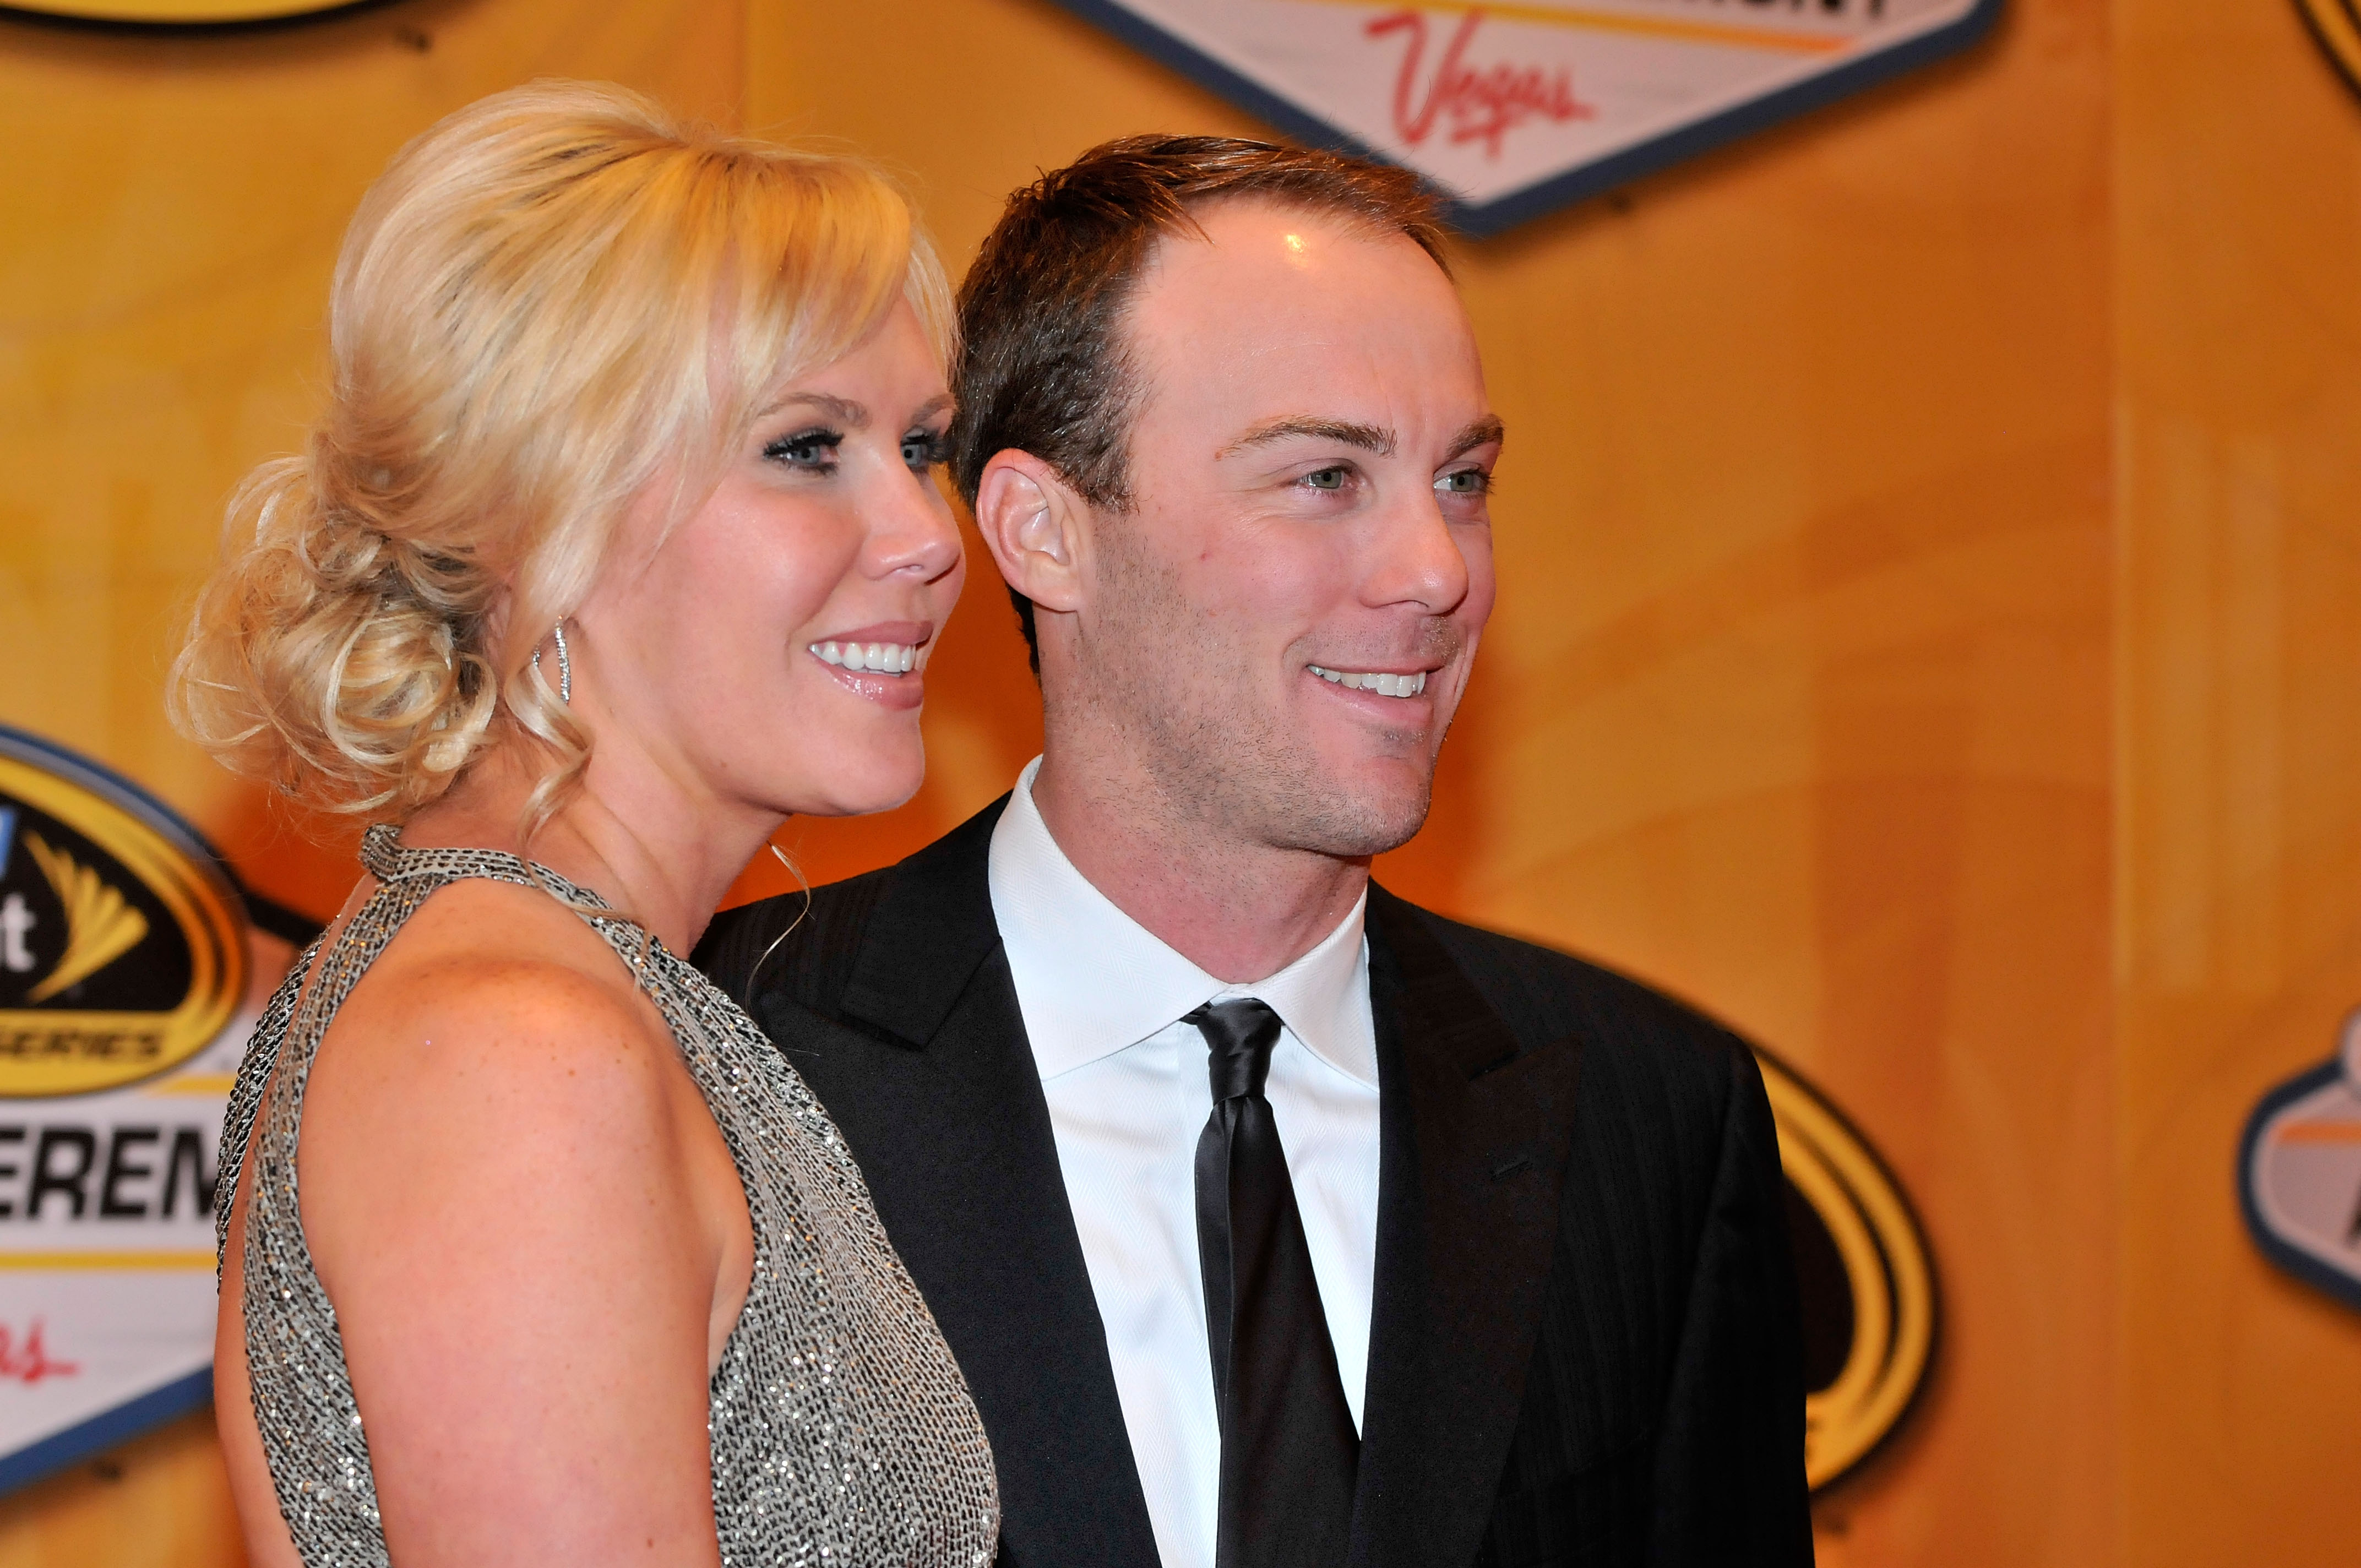 LAS VEGAS, NV - DECEMBER 03:  (R-L) NASCAR driver Kevin Harvick arrives with his wife DeLana at the NASCAR Sprint Cup Series awards banquet at the Wynn Las Vegas Hotel on December 3, 2010 in Las Vegas, Nevada.  (Photo by David Becker/Getty Images for NASC